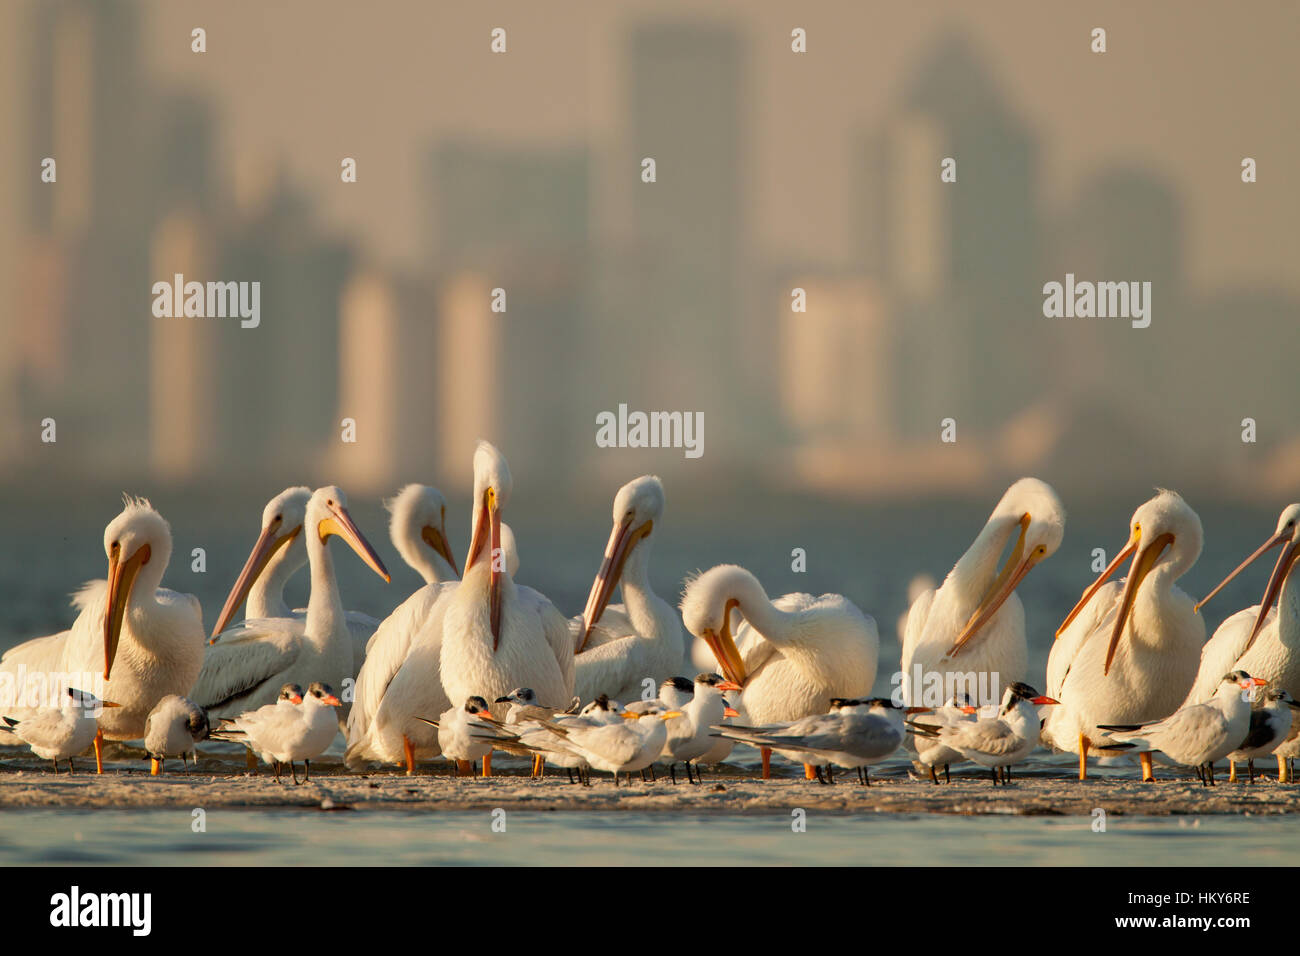 White pelicans congregate at the mouth of the Alafia River in Tampa bay, Florida. Stock Photo